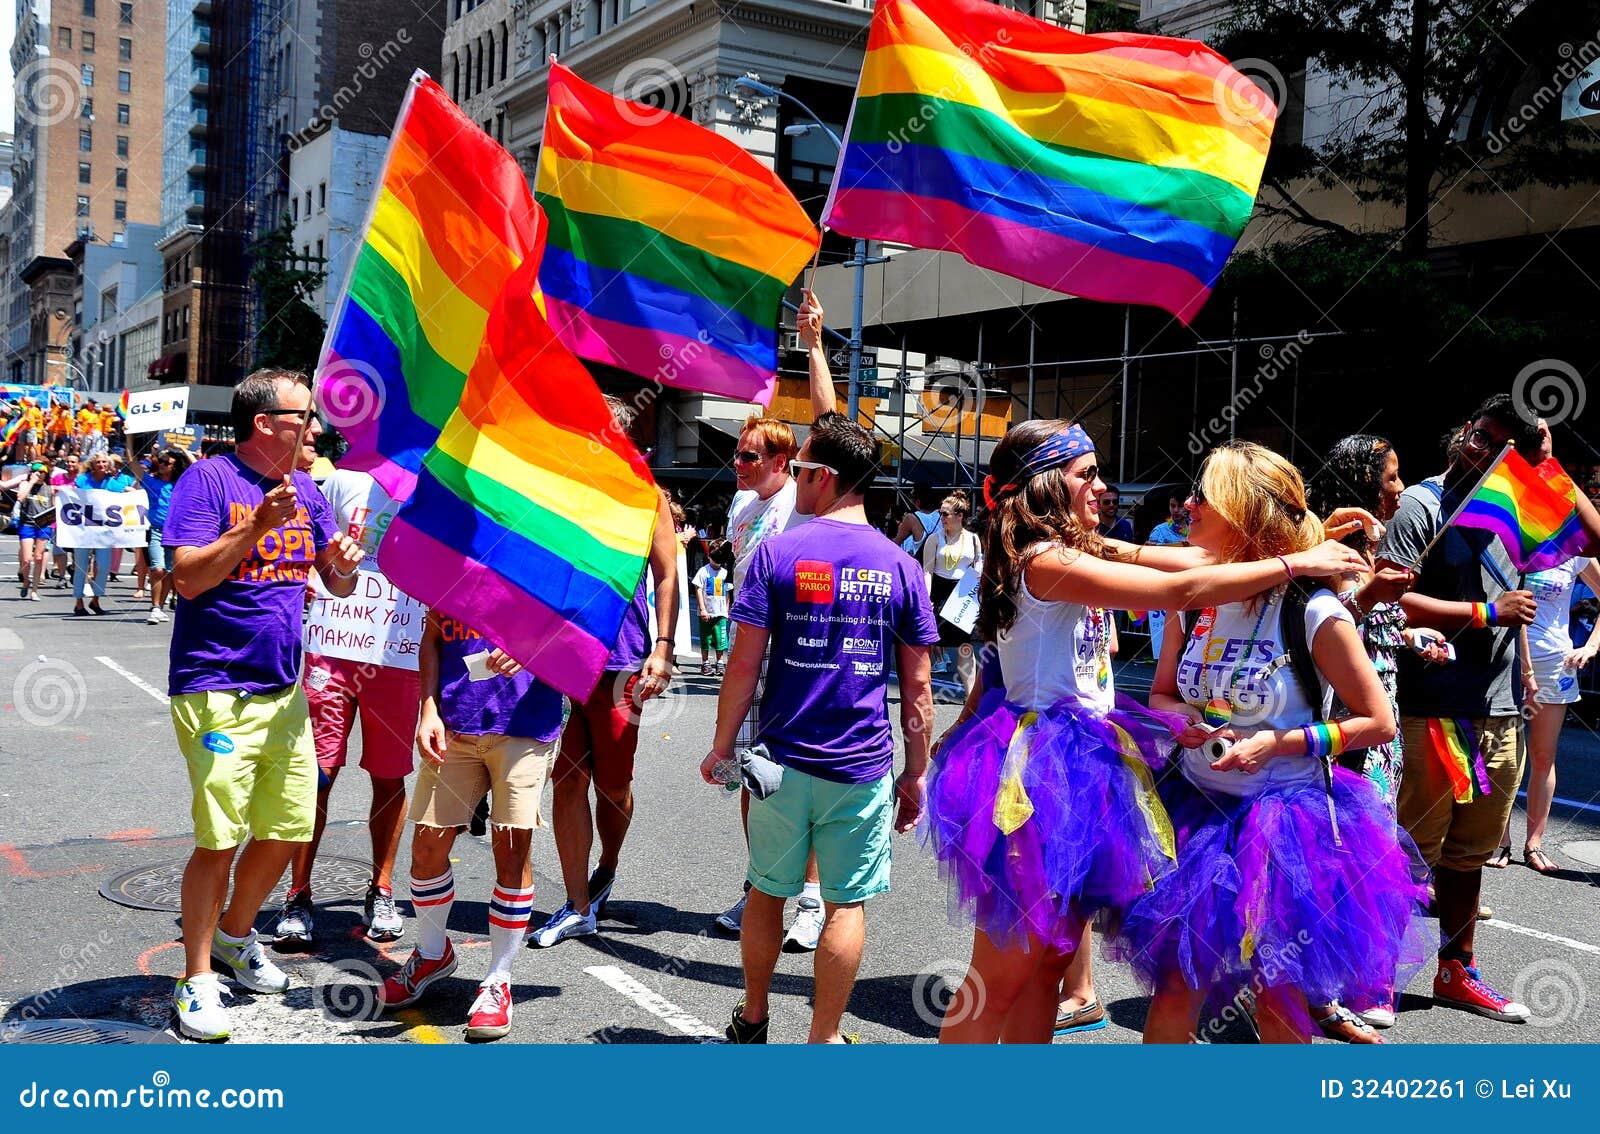 nyc-gay-pride-parade-marchers-members-gets-better-project-carrying-rainbow-flags-marching-s-fifth-avenue-32402261.jpg